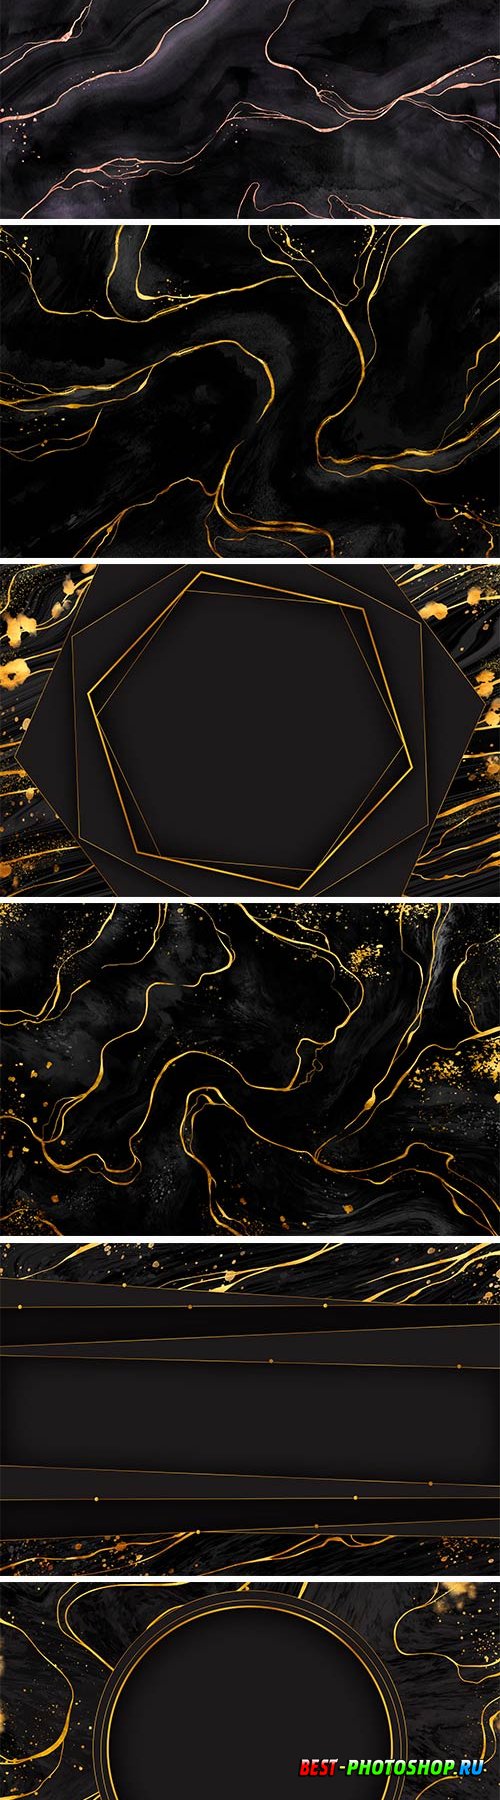 Black and golden marble vector background